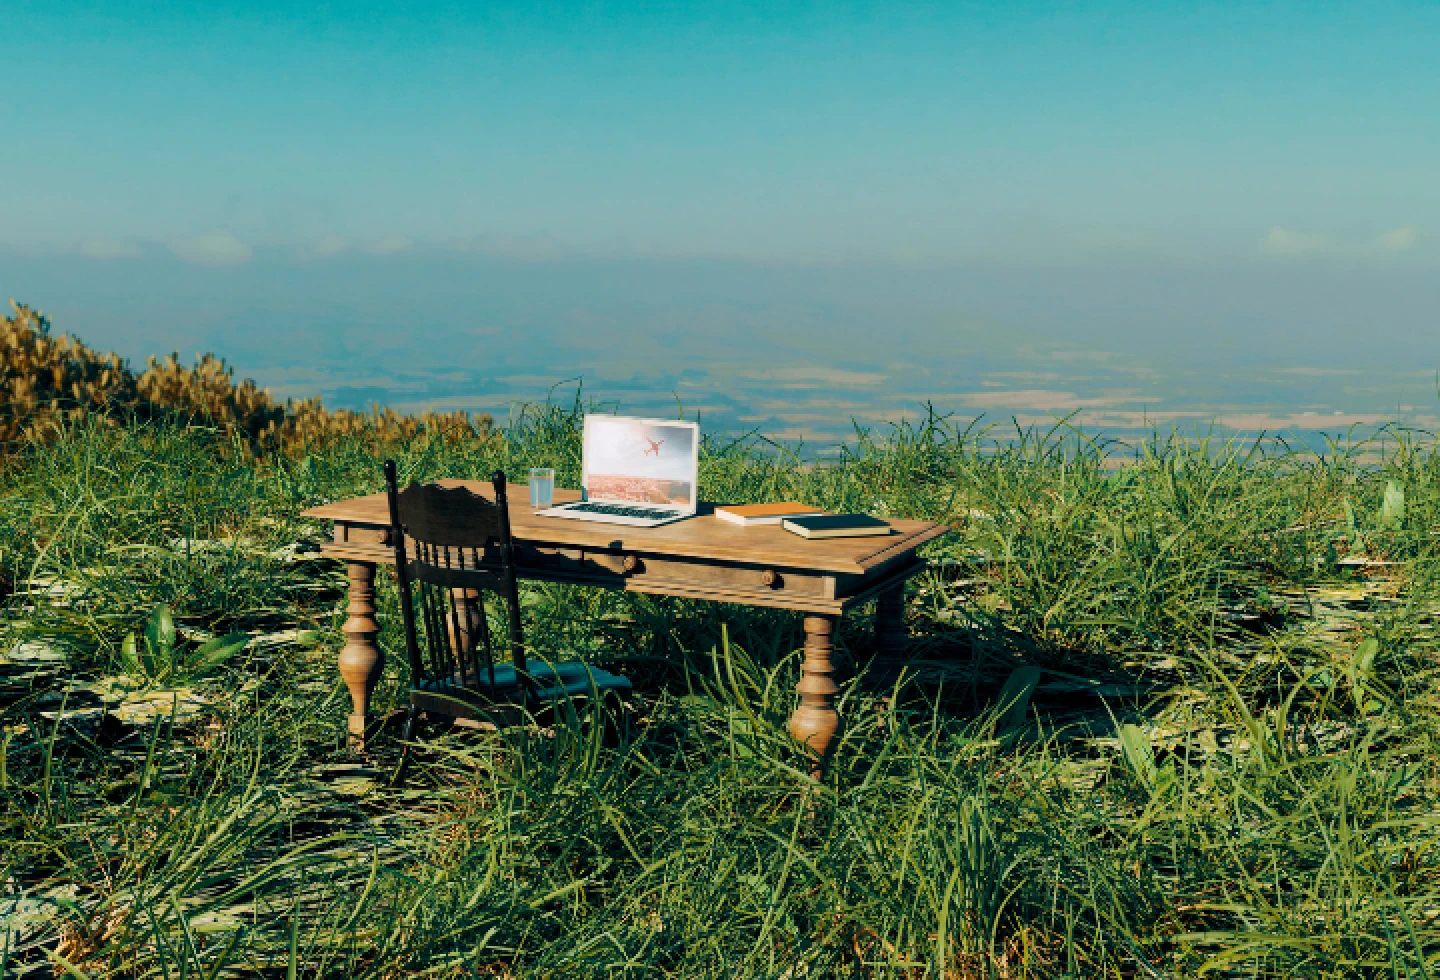 The Future of Work: Remote Work Revolution or a Recipe for Isolation?